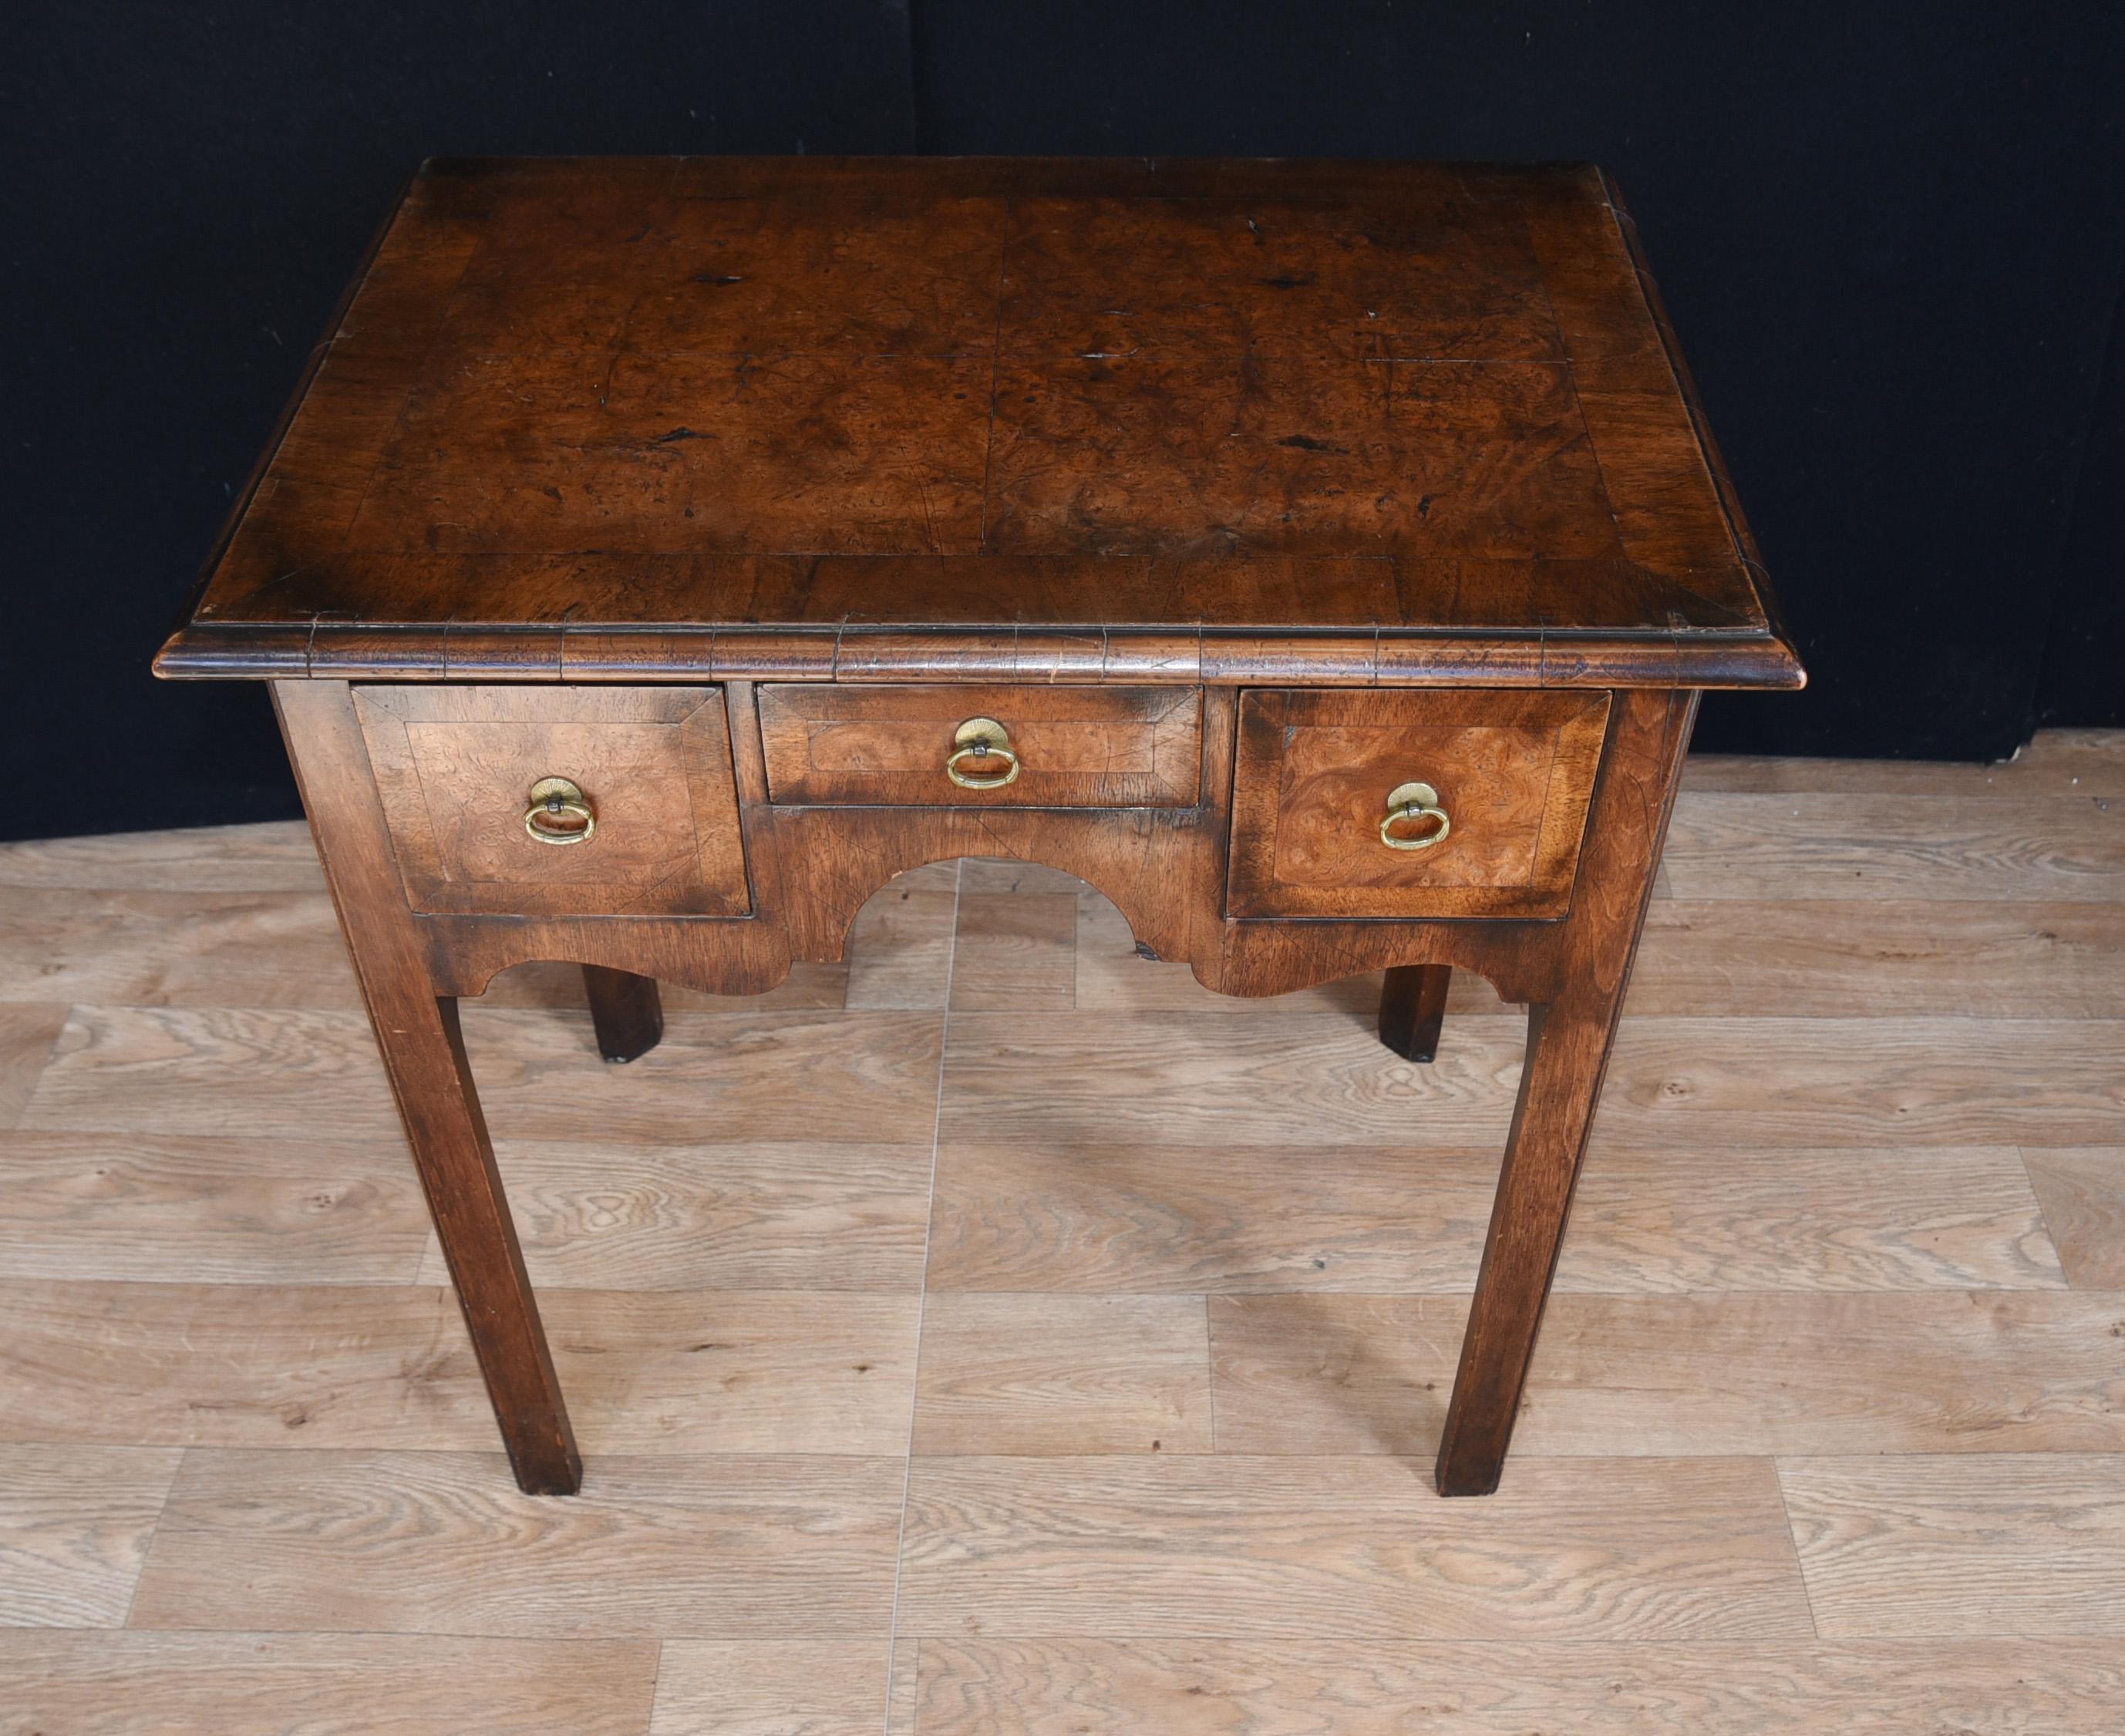 - Gorgeous Queen Ane low boy in elm wood
- We date this to circa 1820
- Very characterful piece in great shape
- Offered in great condition, ready for home use right away
- All our measurements are of the widest and tallest dimension.




 